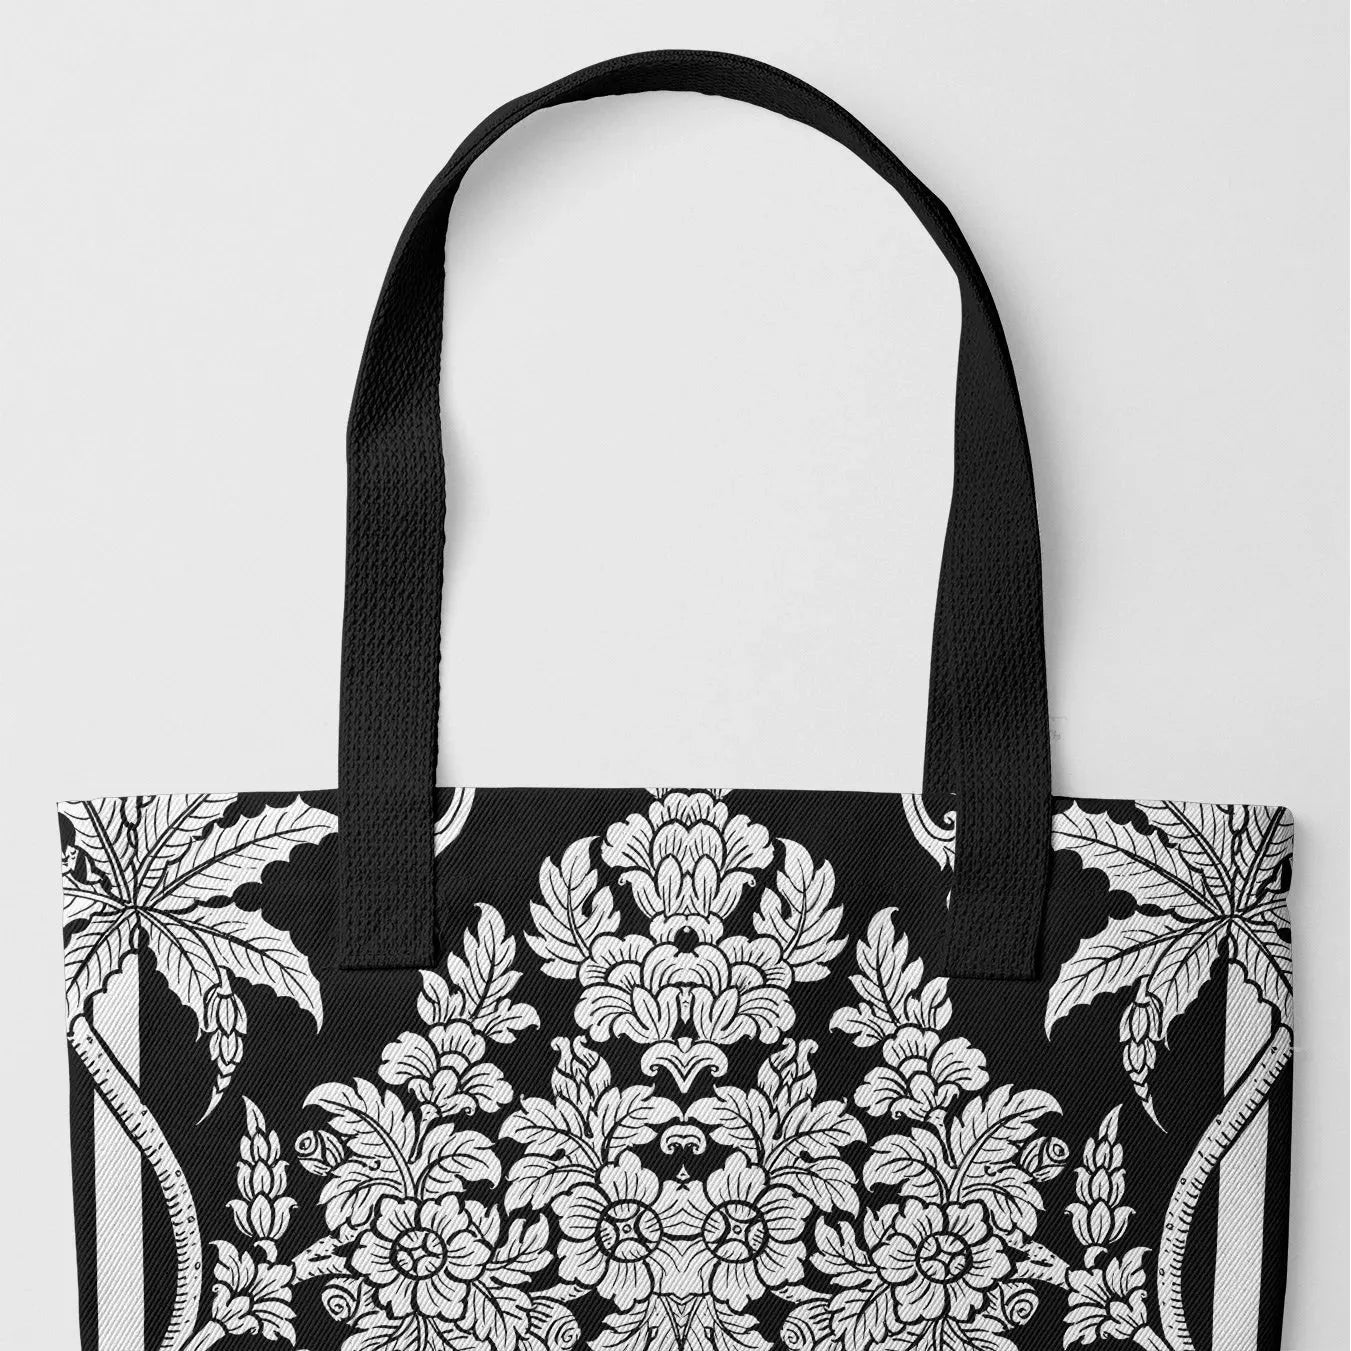 Midnight Oasis Tote Bag - black And White - Heavy Duty Reusable Grocery Bag - Black Handles - Shopping Totes